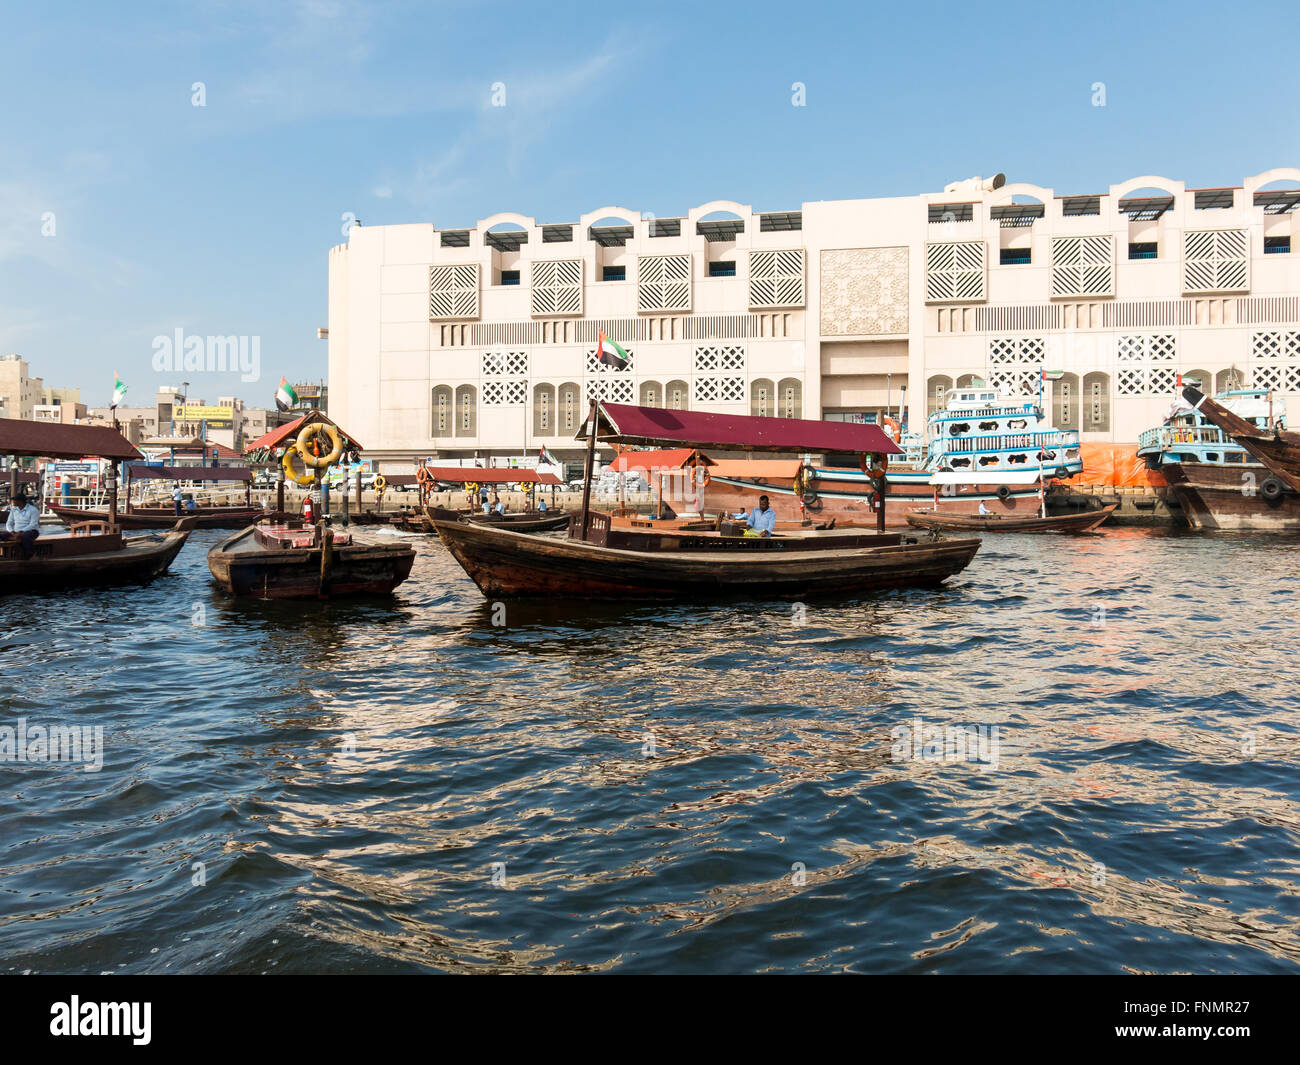 Wooden boats called abra water taxis for public transport across the Creek from Deira to Bur Dubai in Dubai, Emirates Stock Photo